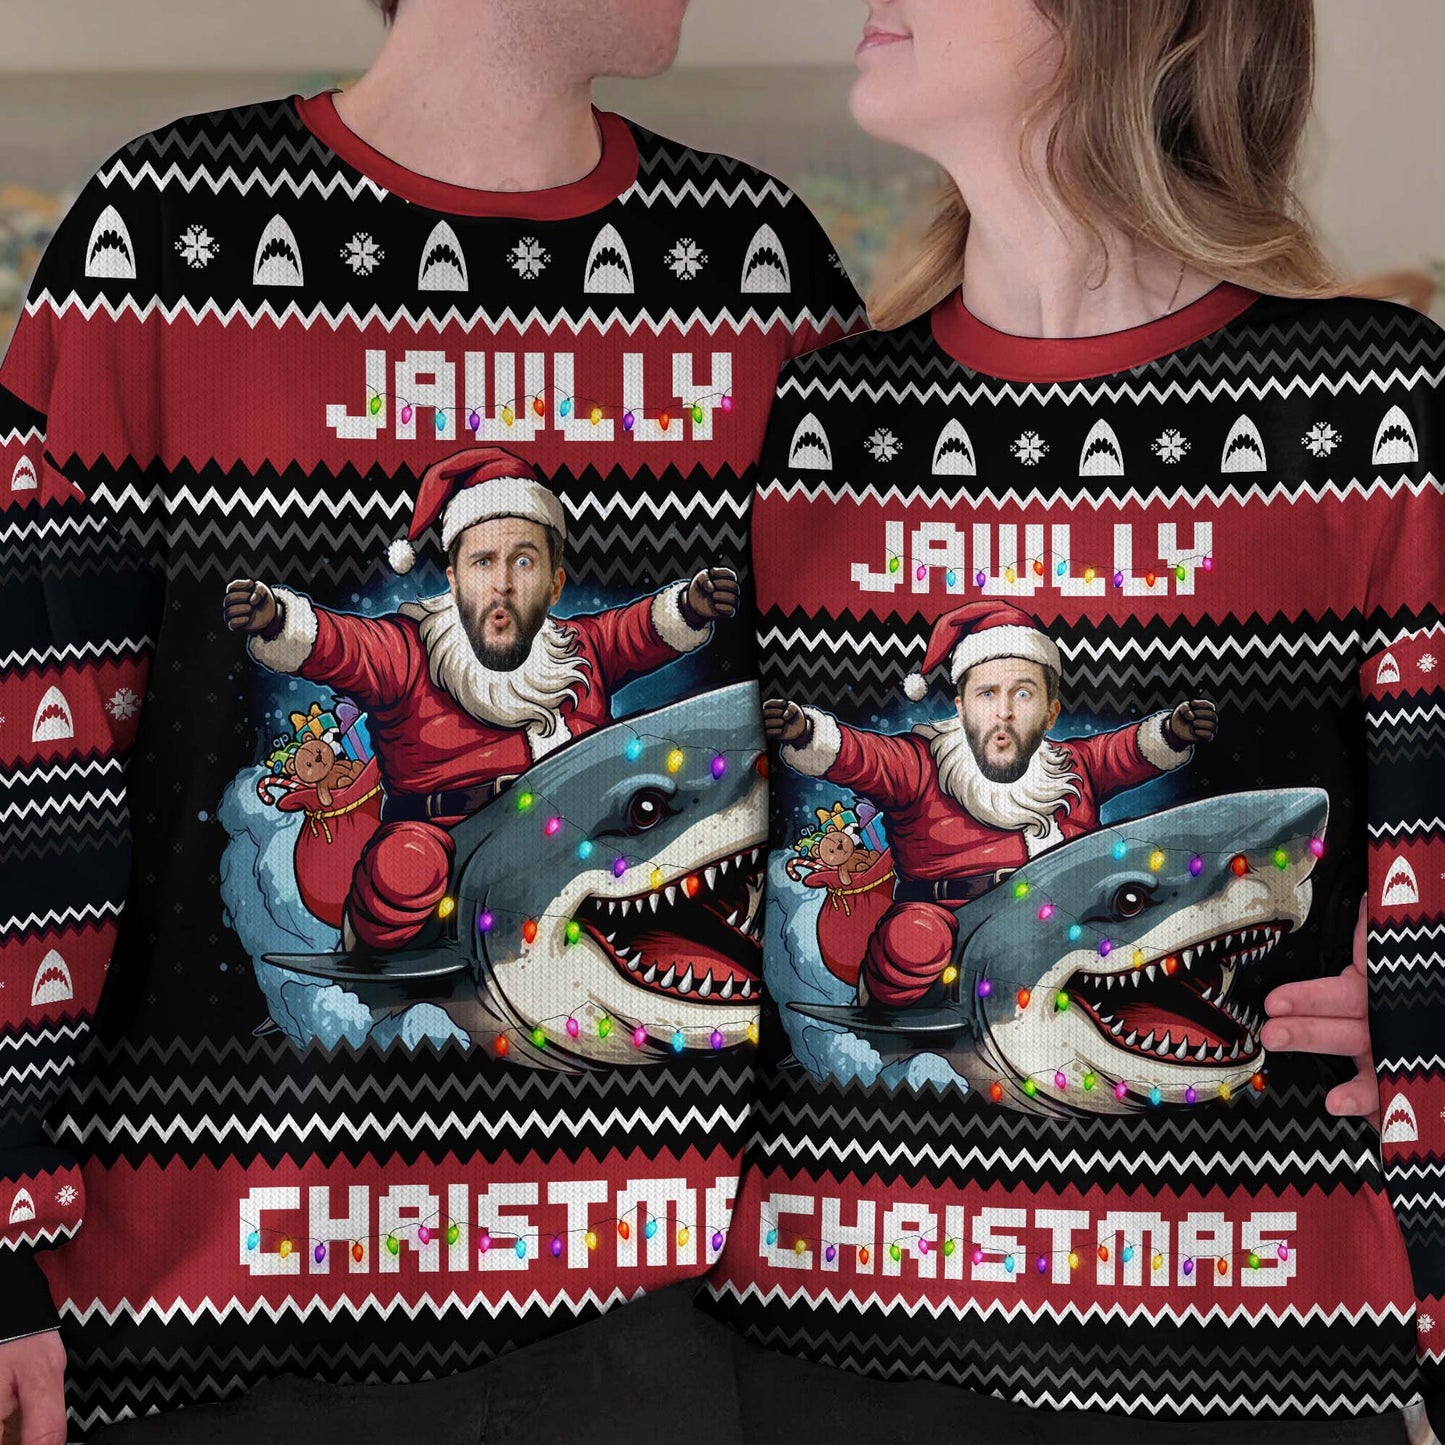 Jawlly Christmas For Shark Lovers - Personalized Photo Ugly Sweater